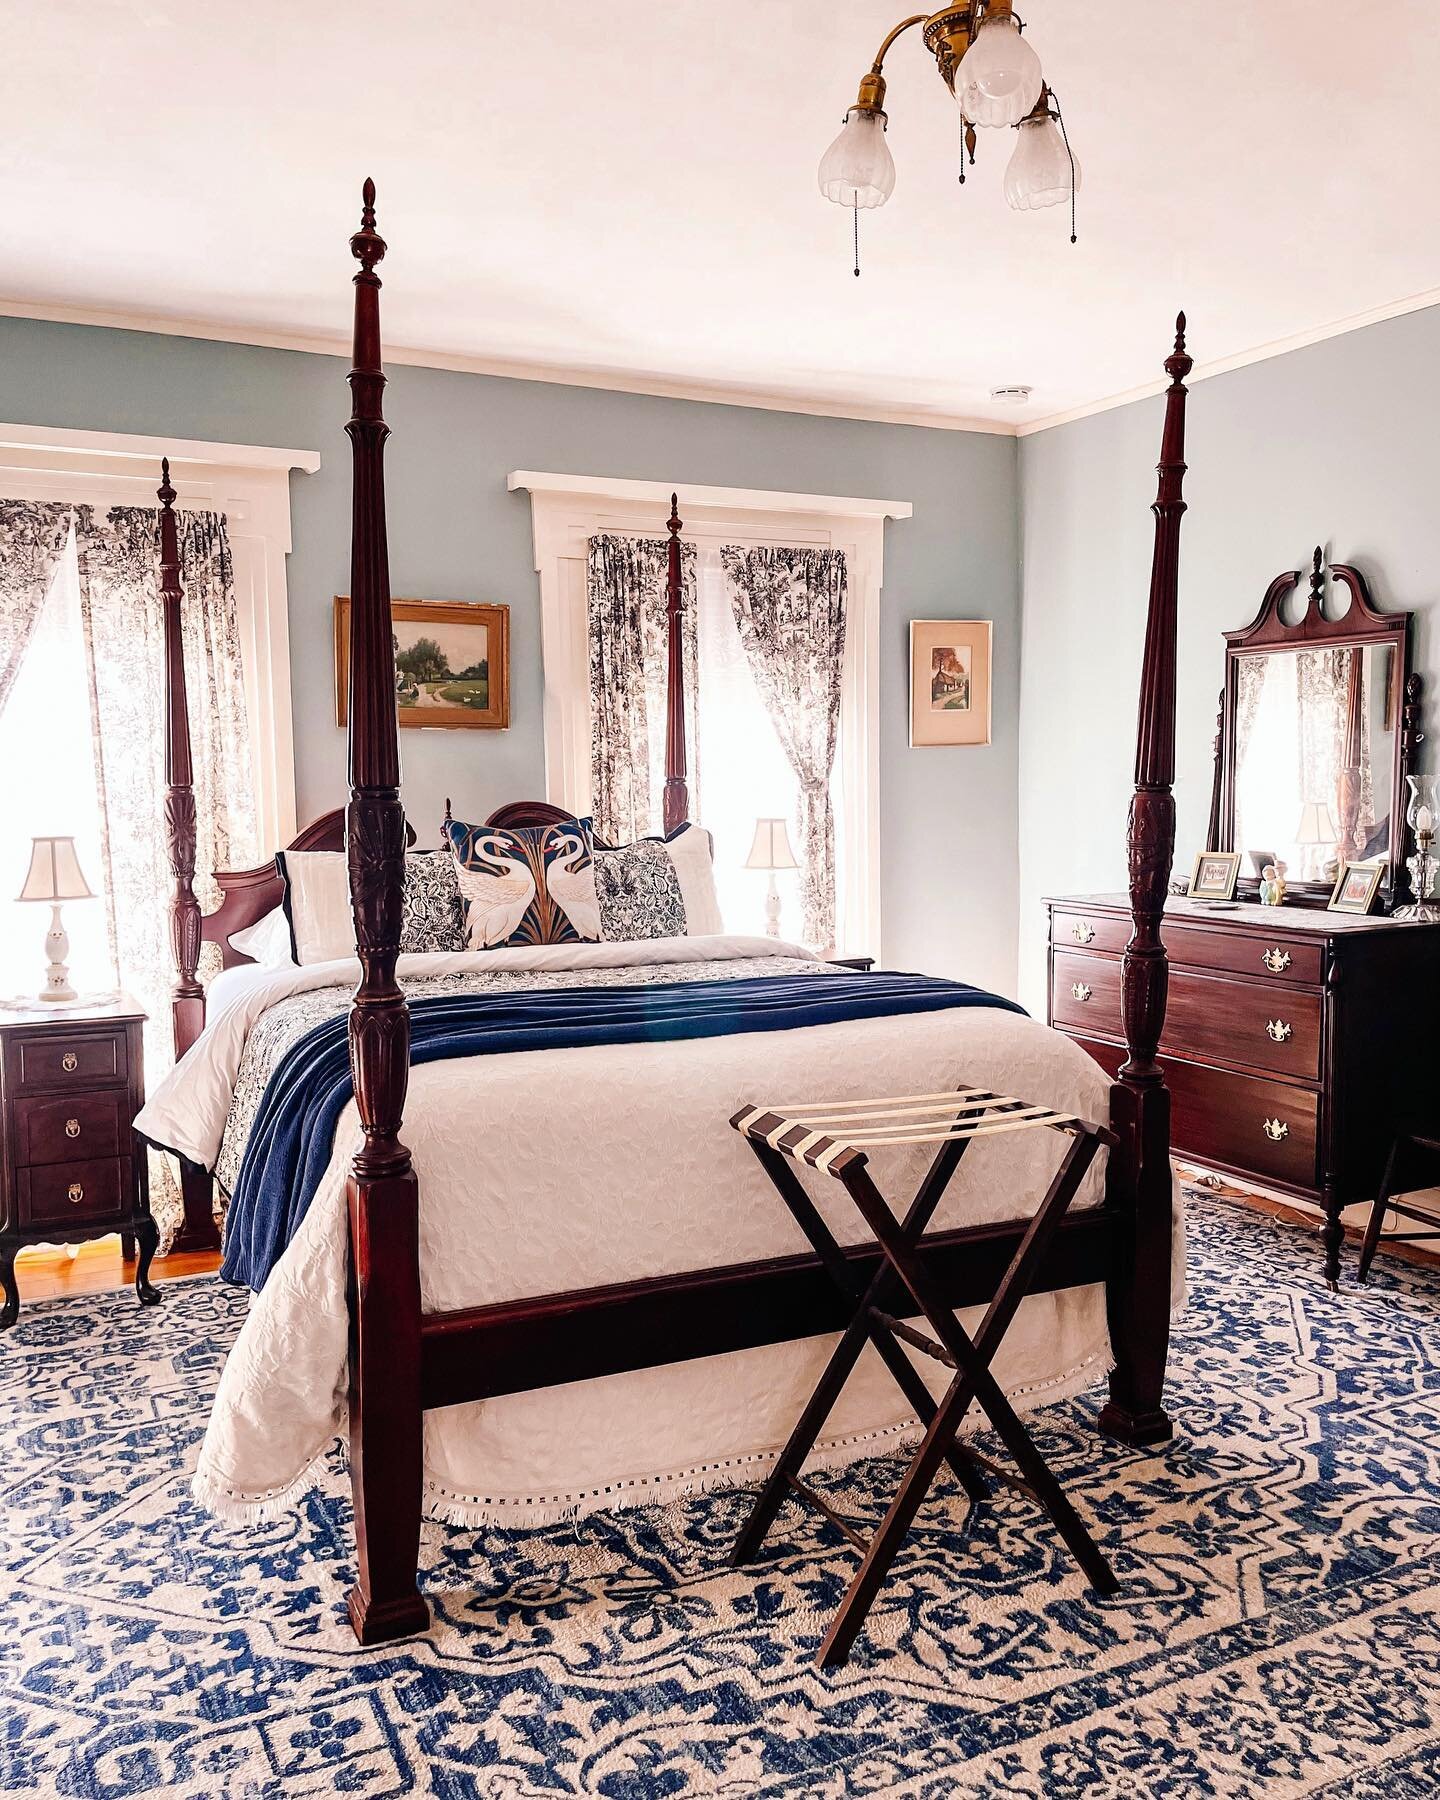 We&rsquo;ve reached the home stretch of winter, and today&rsquo;s warm weather is giving us ✨life✨ #isitspringyet ☀️🌱

Book the Cragin Room via Airbnb, and wake up in the four poster bed of your dreams. Booking link on our website: theoconnellhouse.